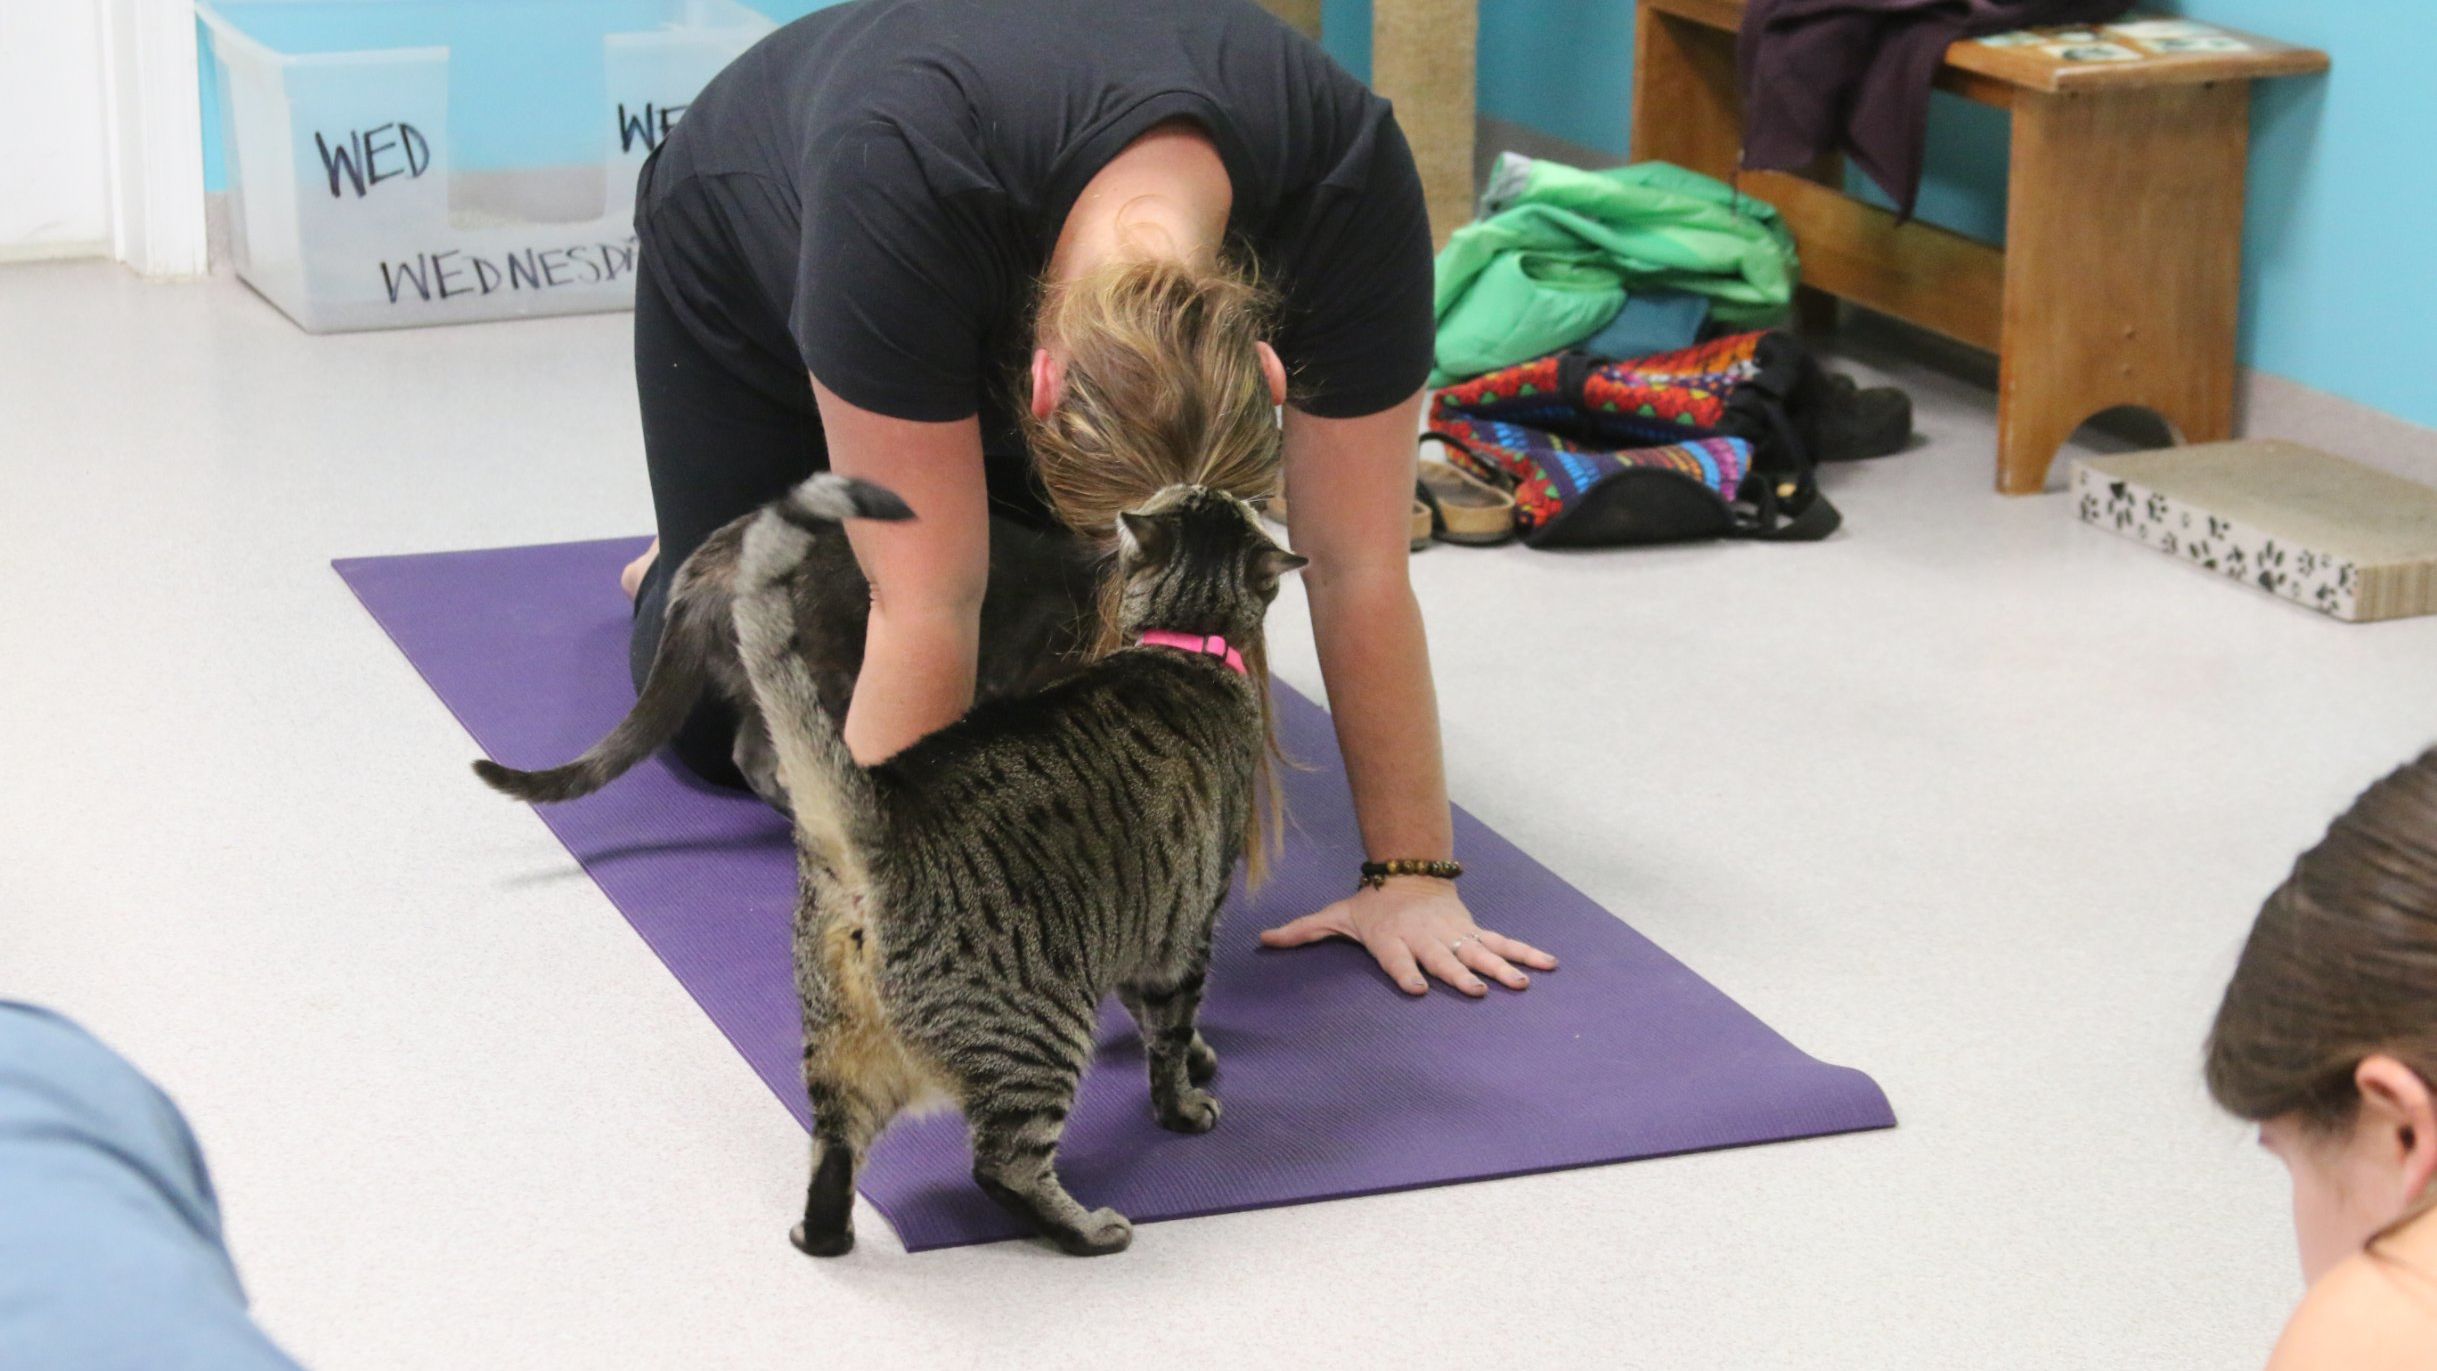 A cat checks a participant's form -- and her ponytail.